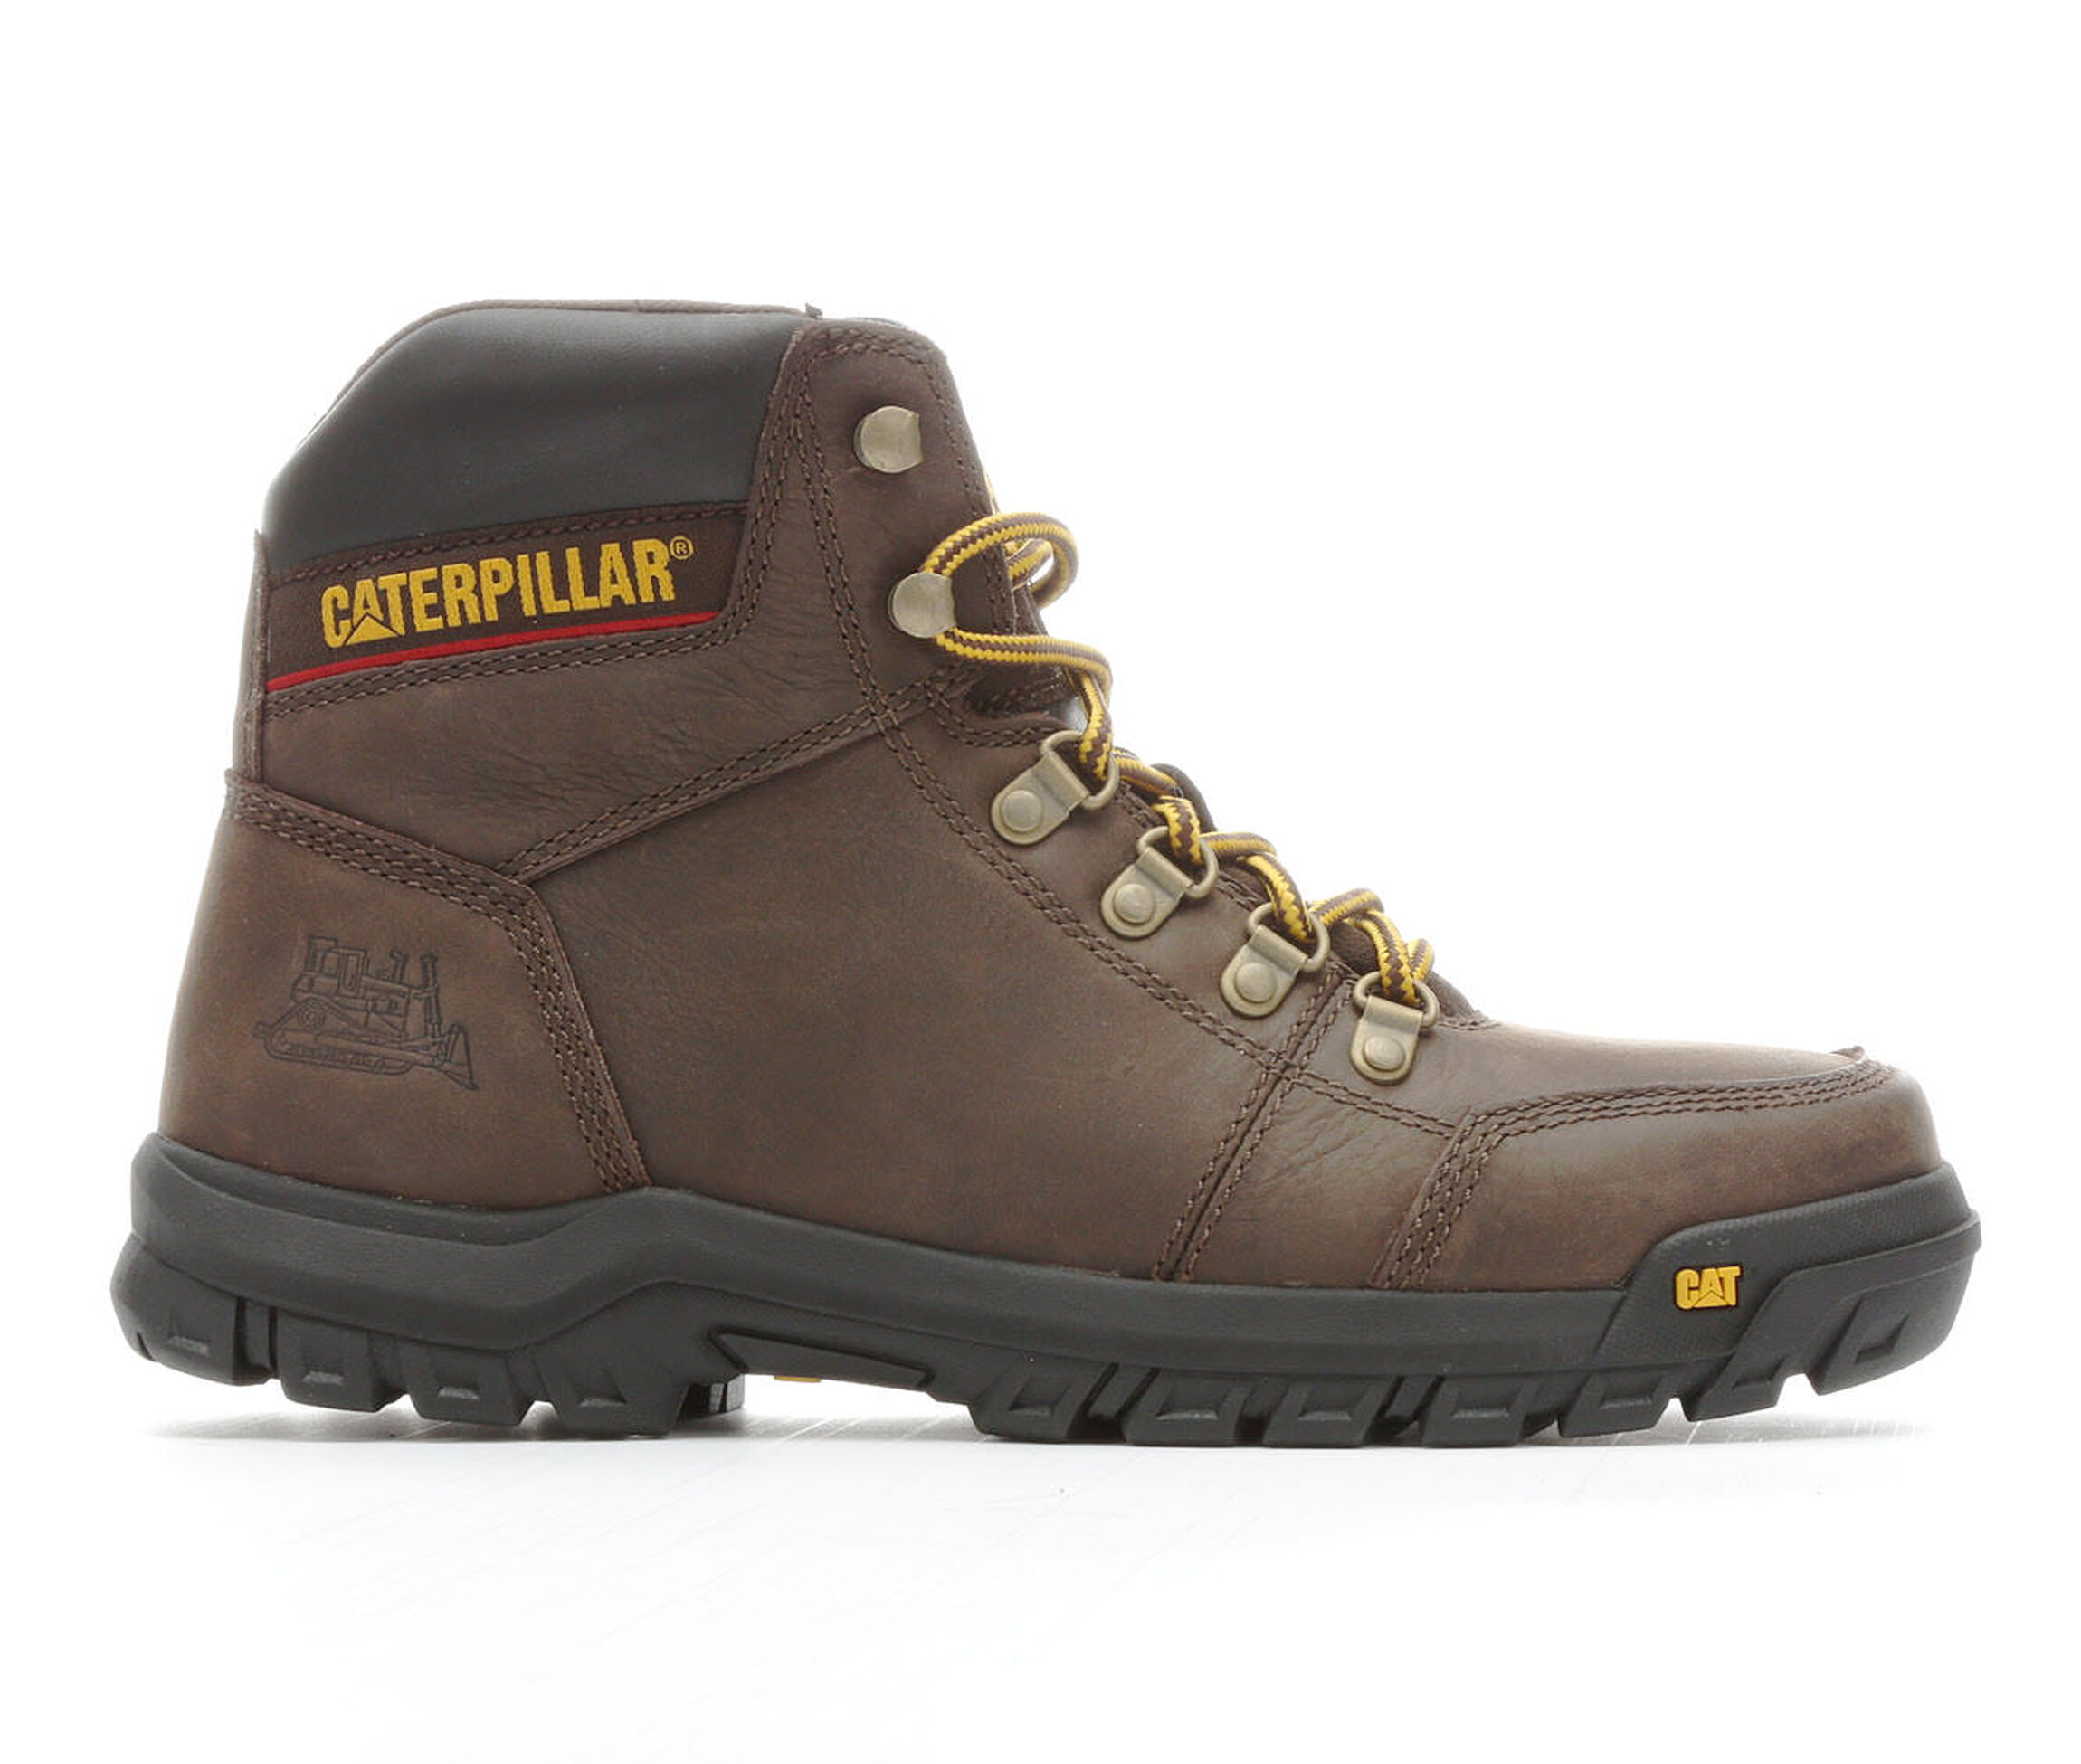 Caterpillar Outline Soft Toe Men's Boots (Brown Leather)